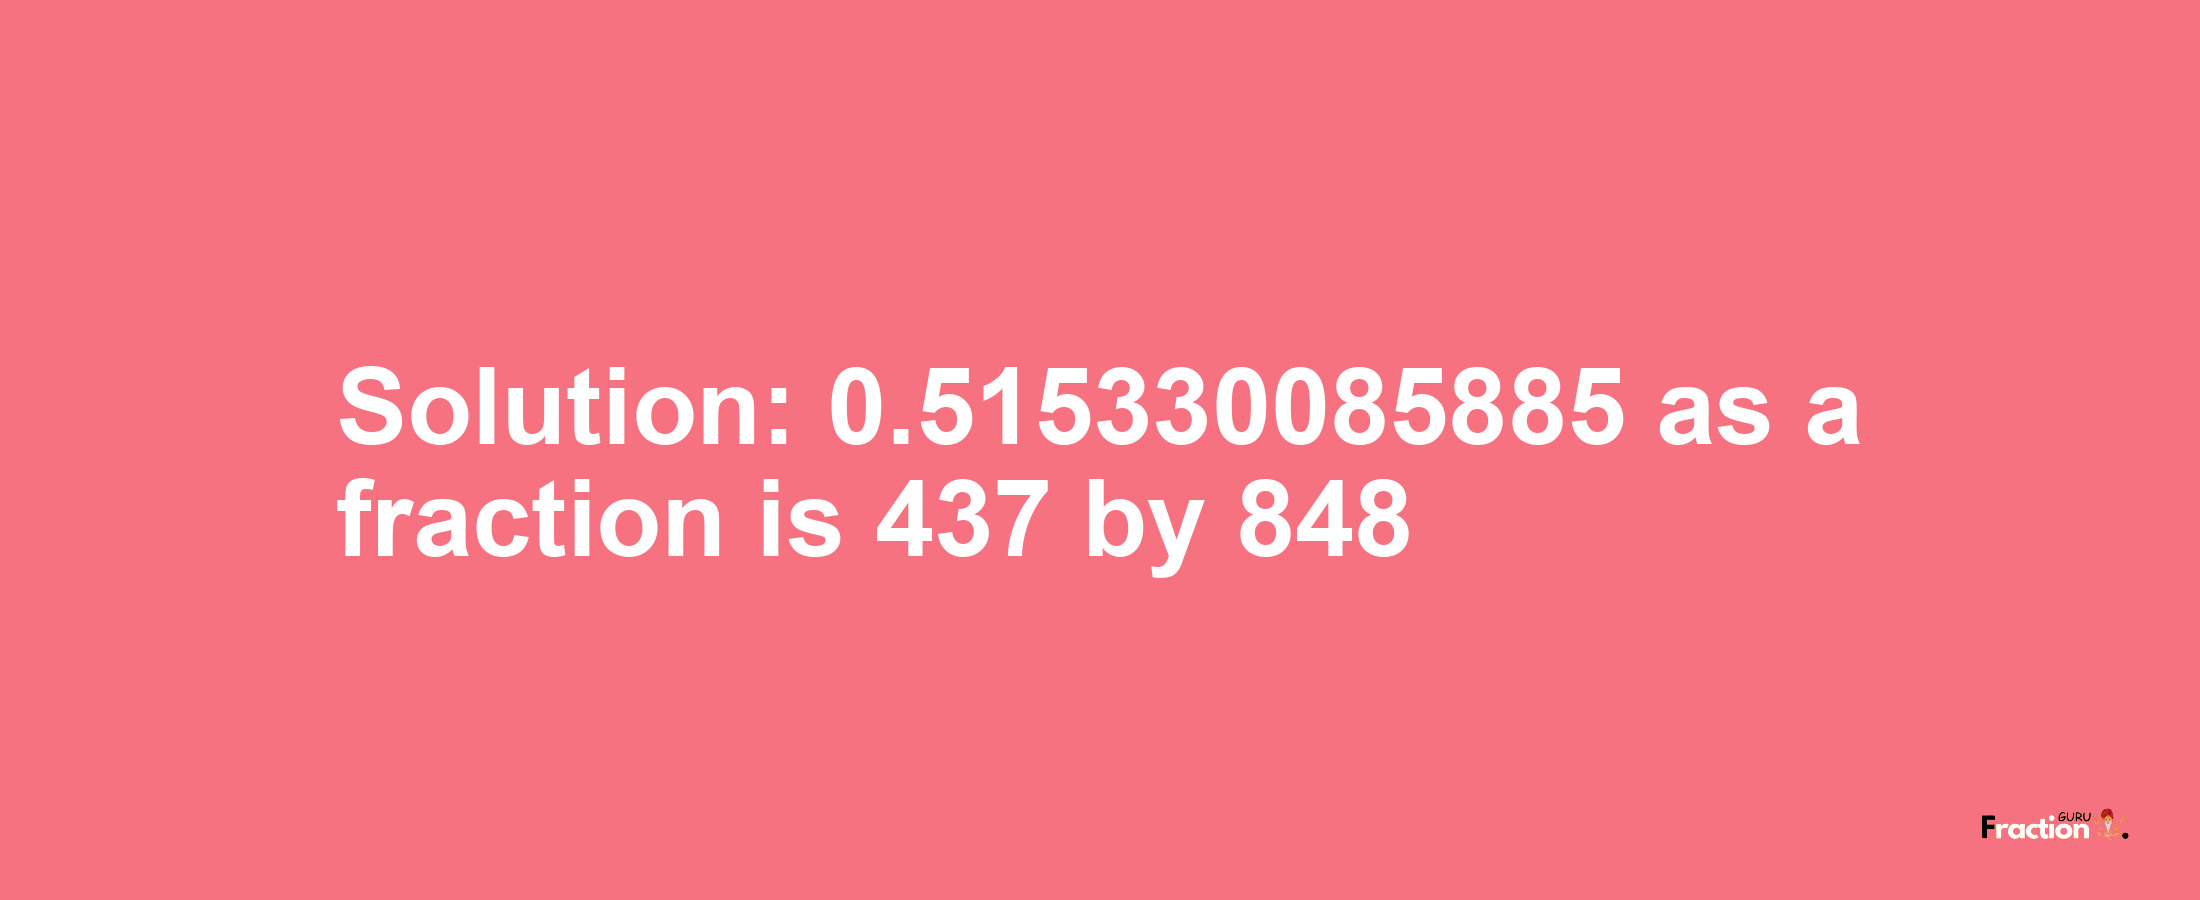 Solution:0.515330085885 as a fraction is 437/848